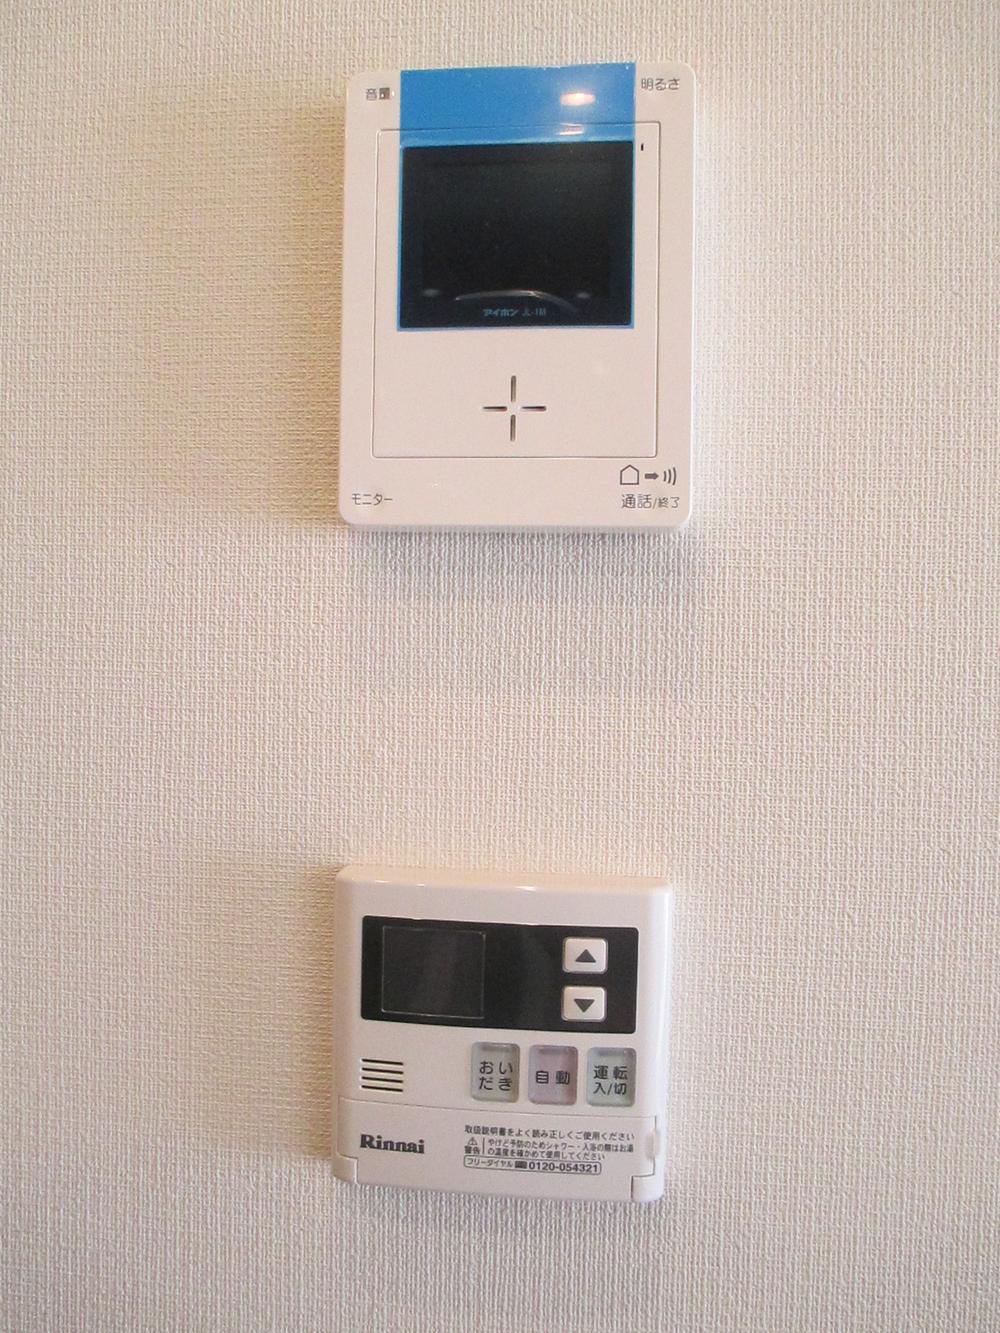 Other. Monitor with intercom and water heater remote control. Here you can also water-topped bathroom.